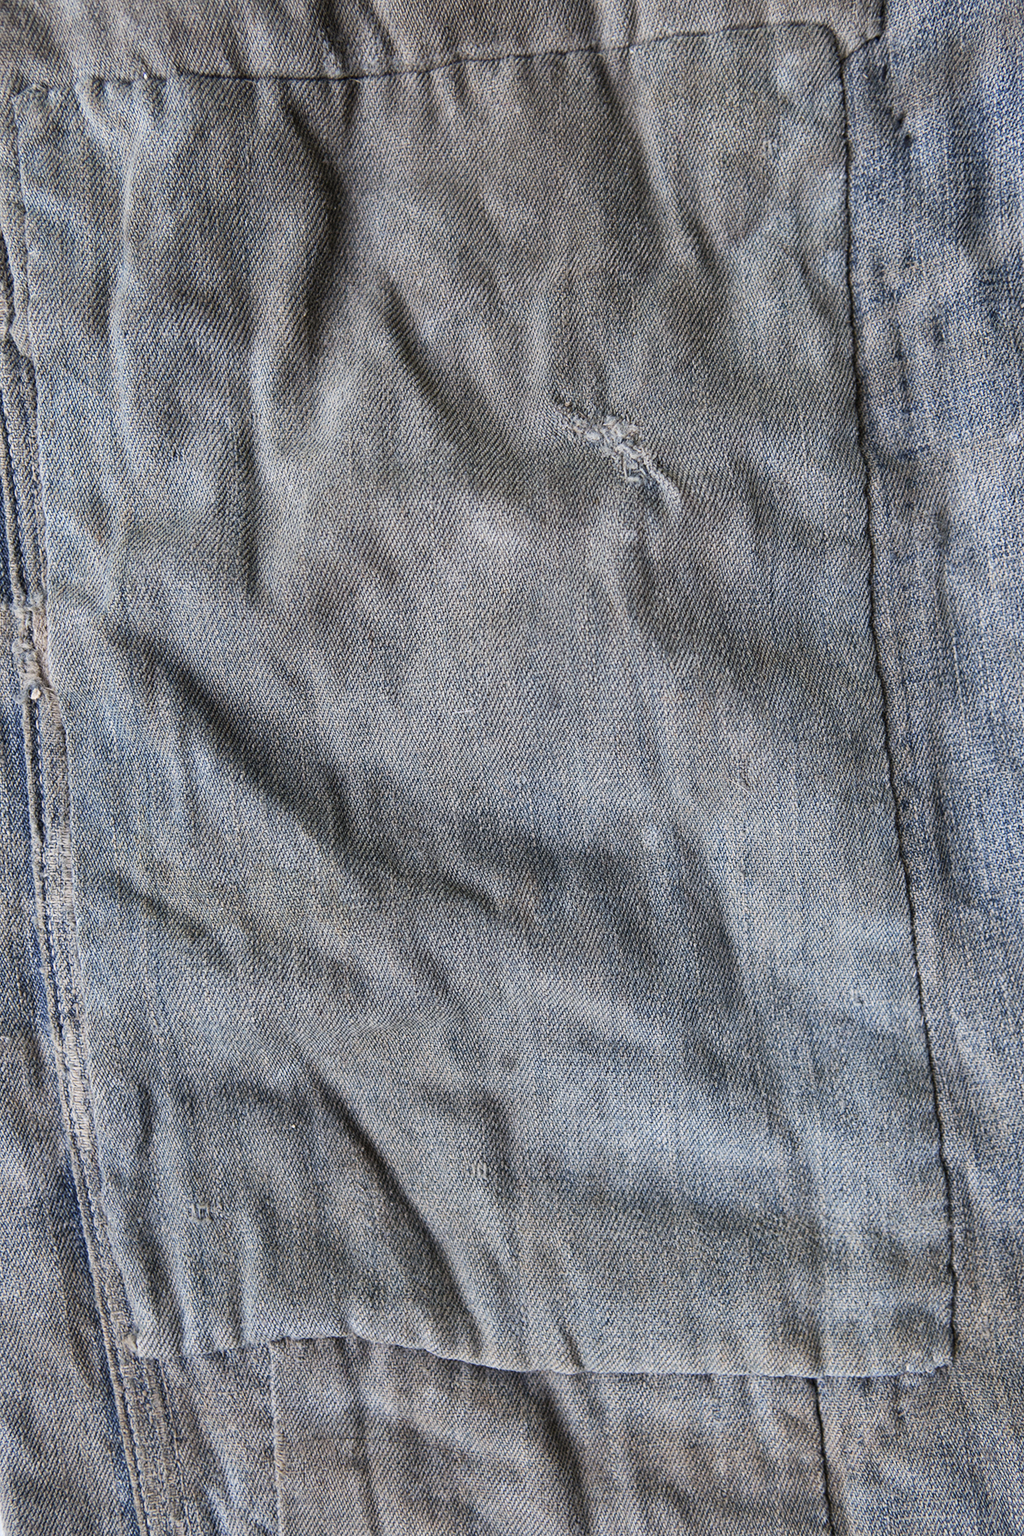 Banditphotographer Blog: Turn of the Century patched overalls found in NC.